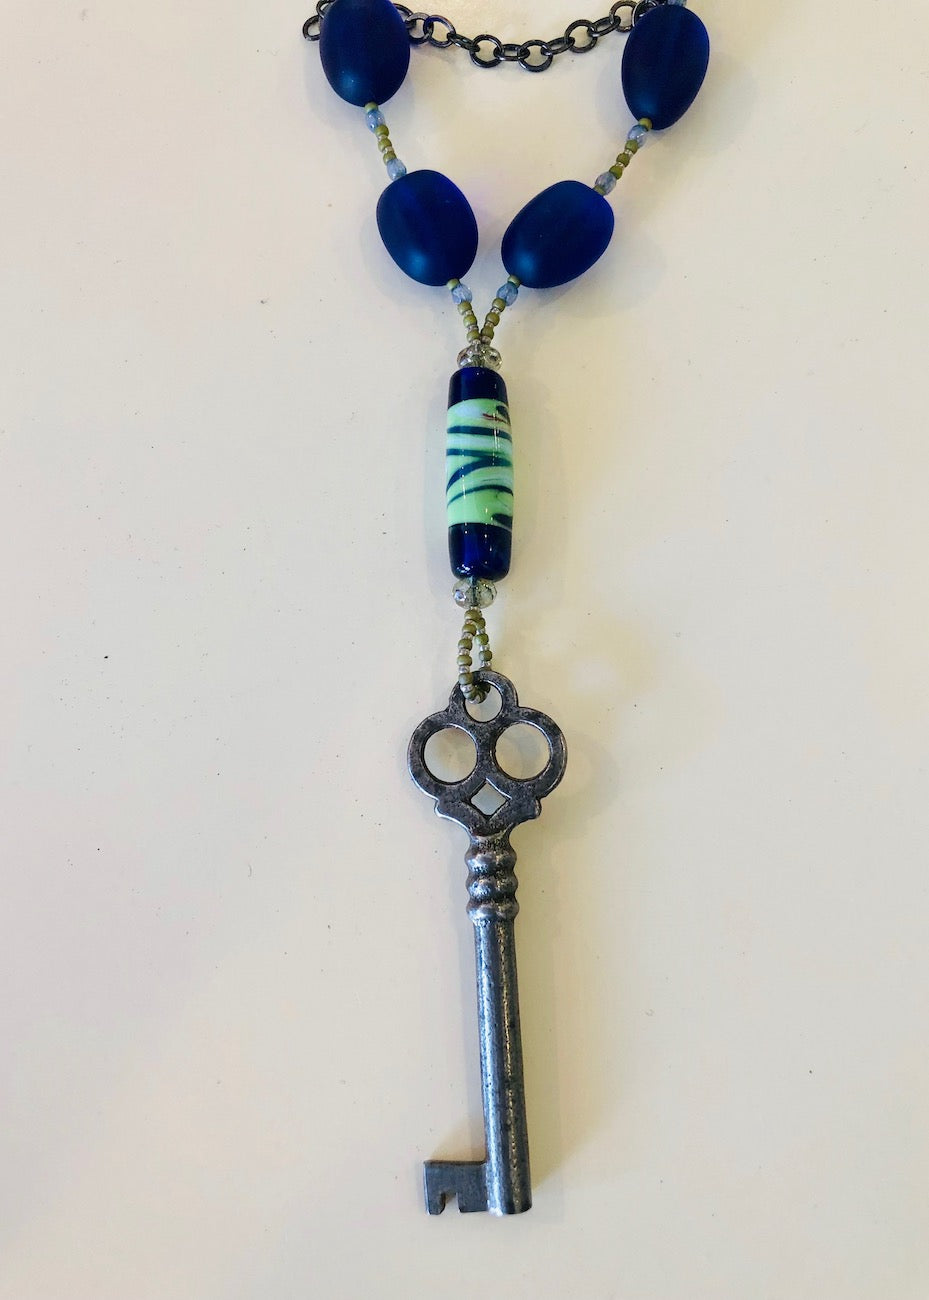 Vintage Key with Recycled Glass Necklace